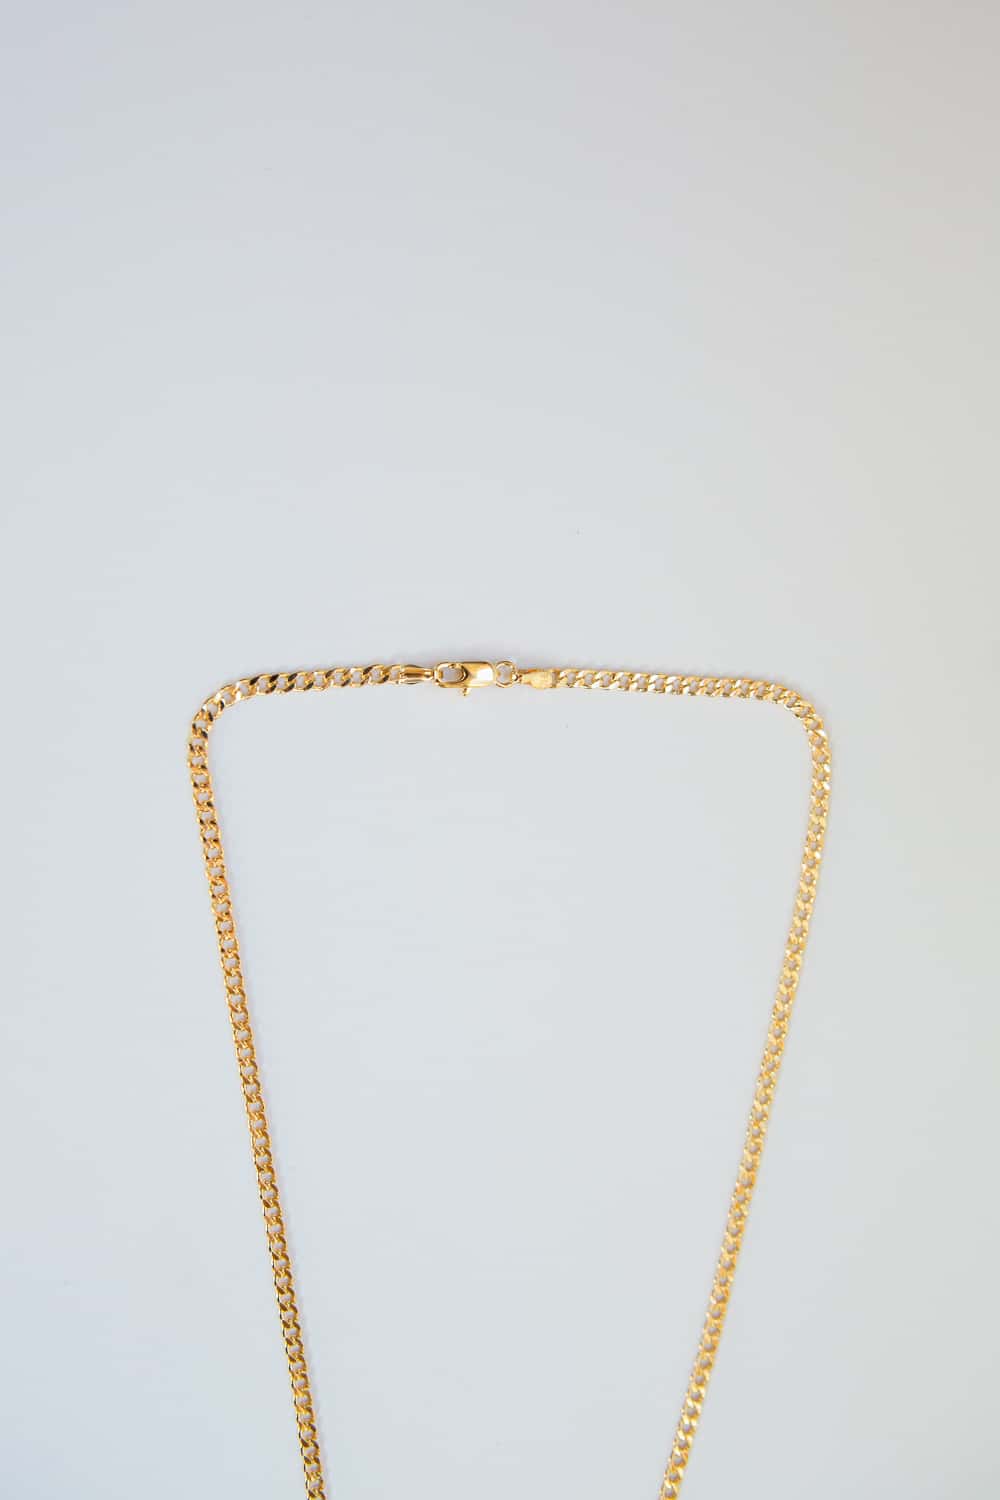 14 K Gold Filled Curb Chain, 3.5 mm 14 20 Dainty Curb Chain CH #734, 14 K  Gold Filled Unfinished Cable Jewelry Chain